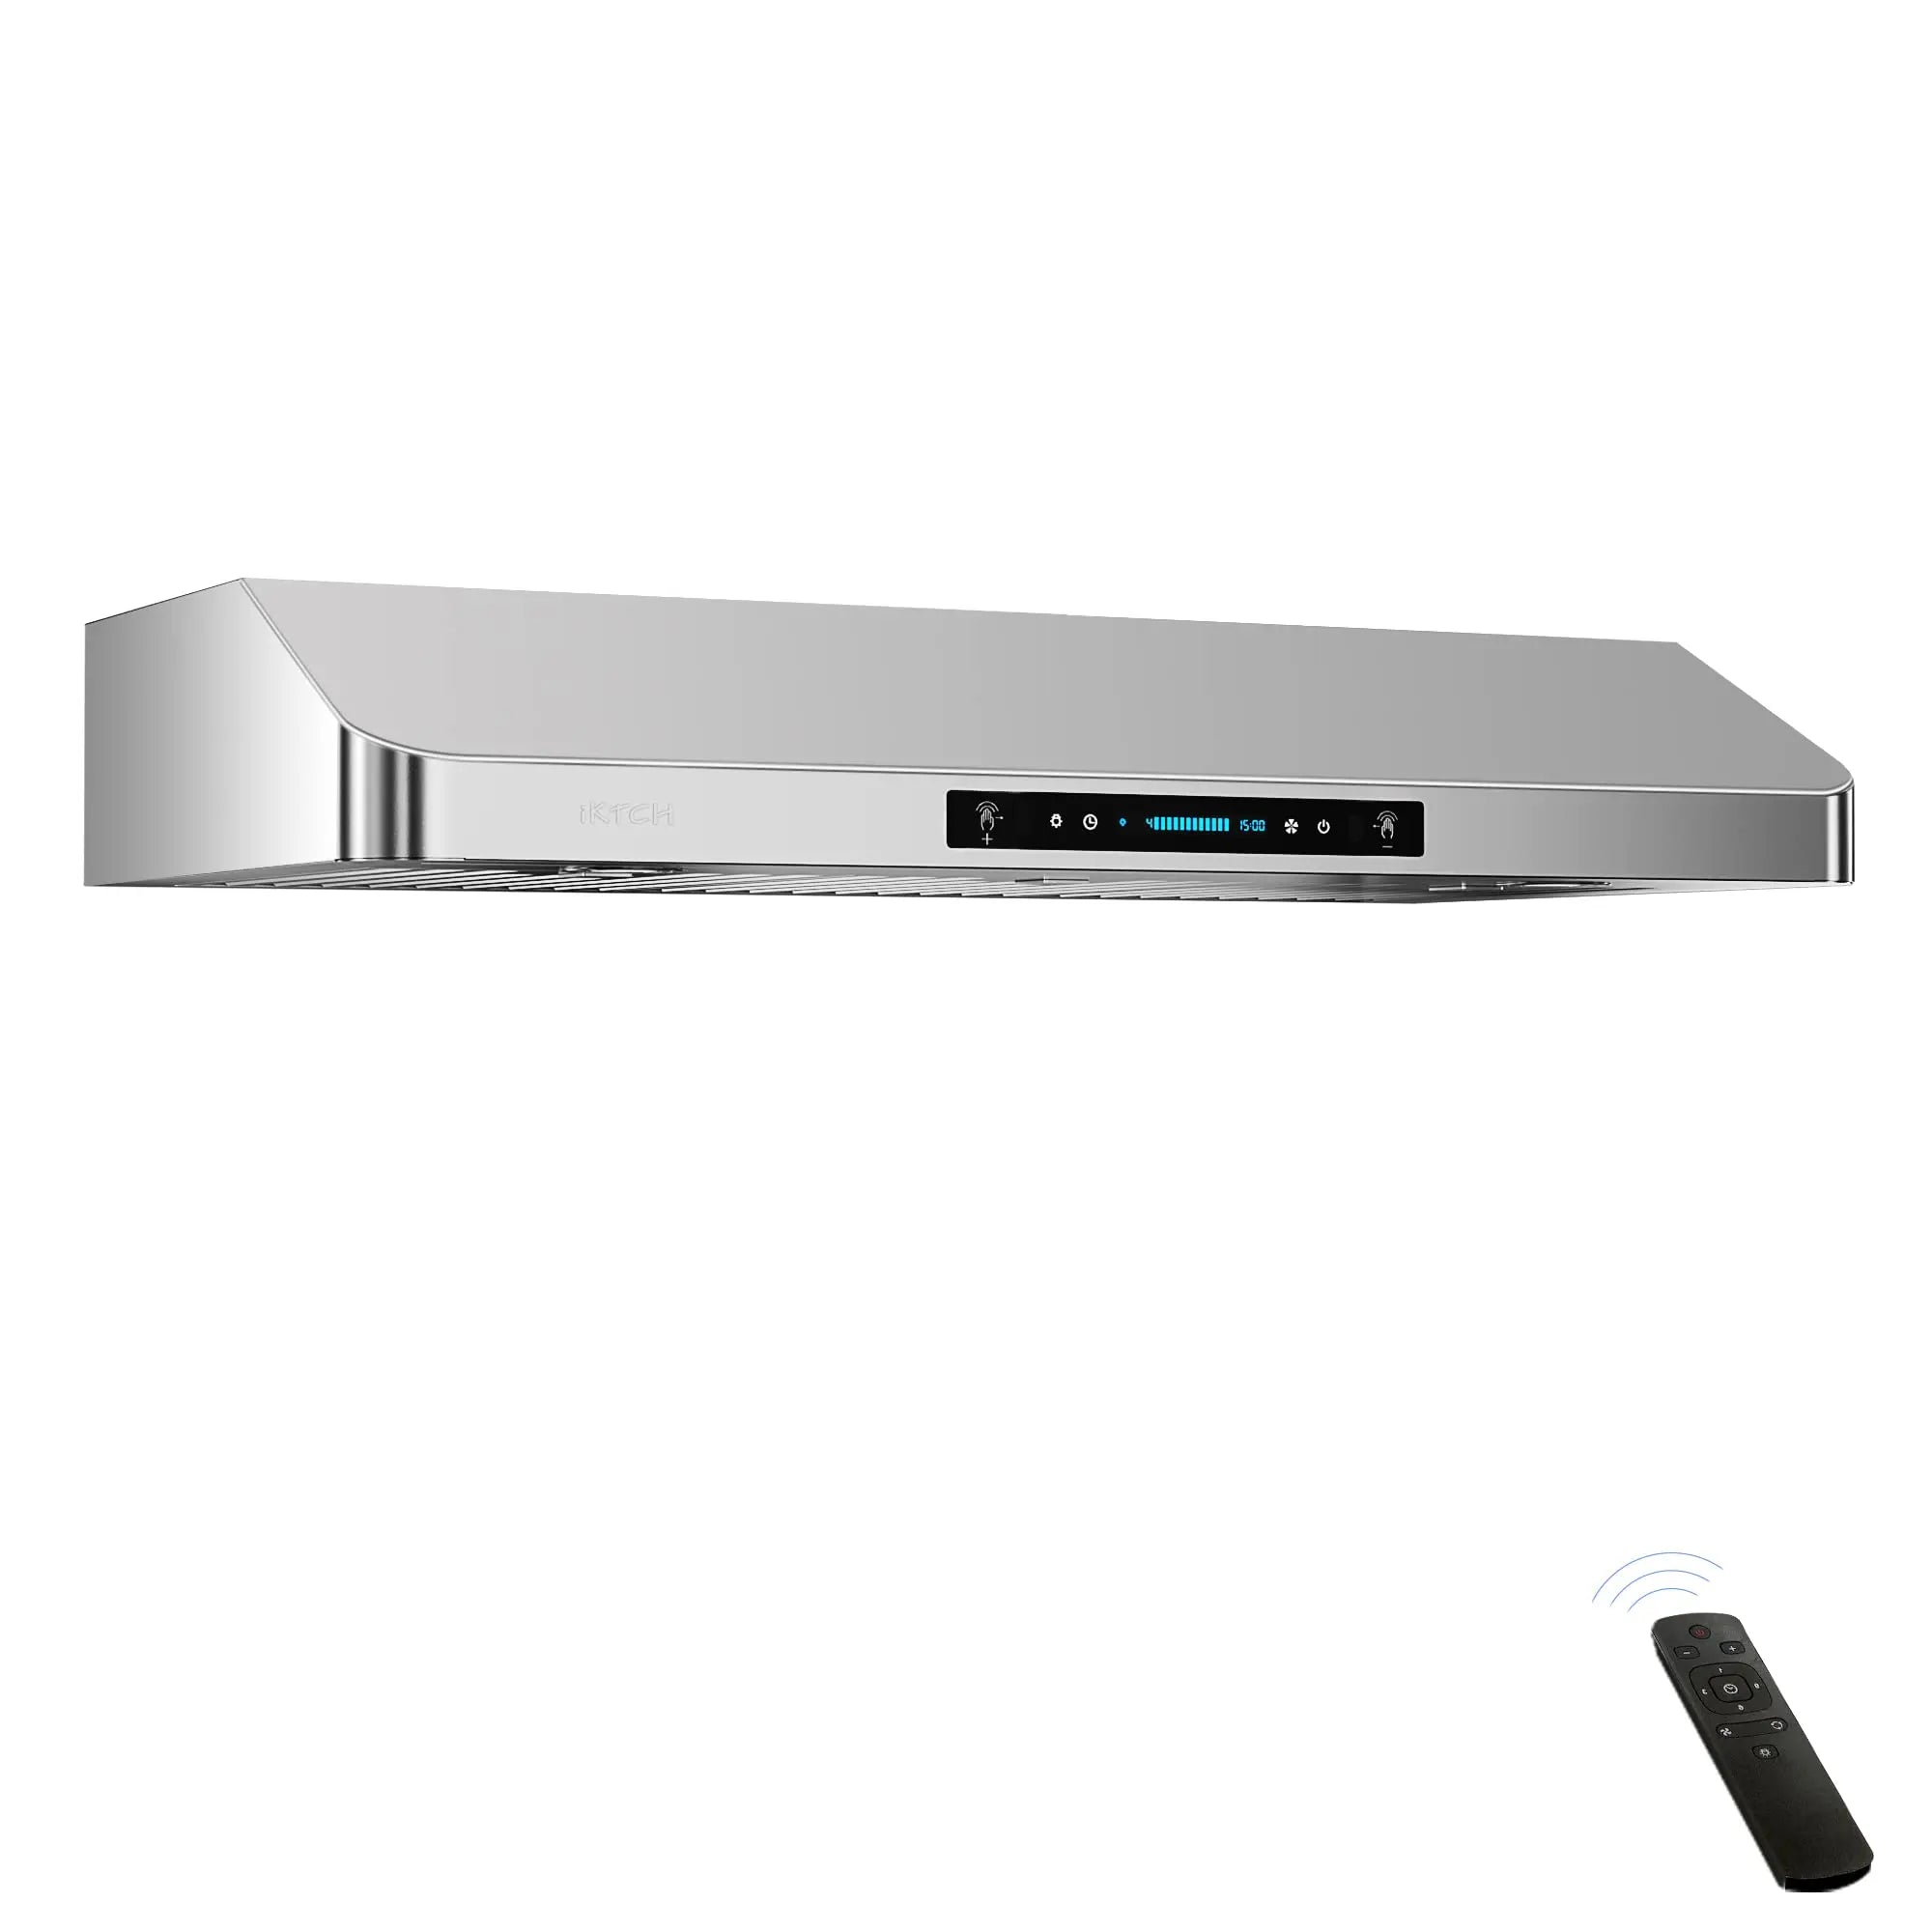 IKTCH 30 inch Built-in/Insert Range Hood 900 CFM, Ducted/Ductless  Convertible Duct, Stainless Steel Kitchen Vent Hood with 4 Speed Gesture  Sensing&Touch Control Panel(IKB01-30)